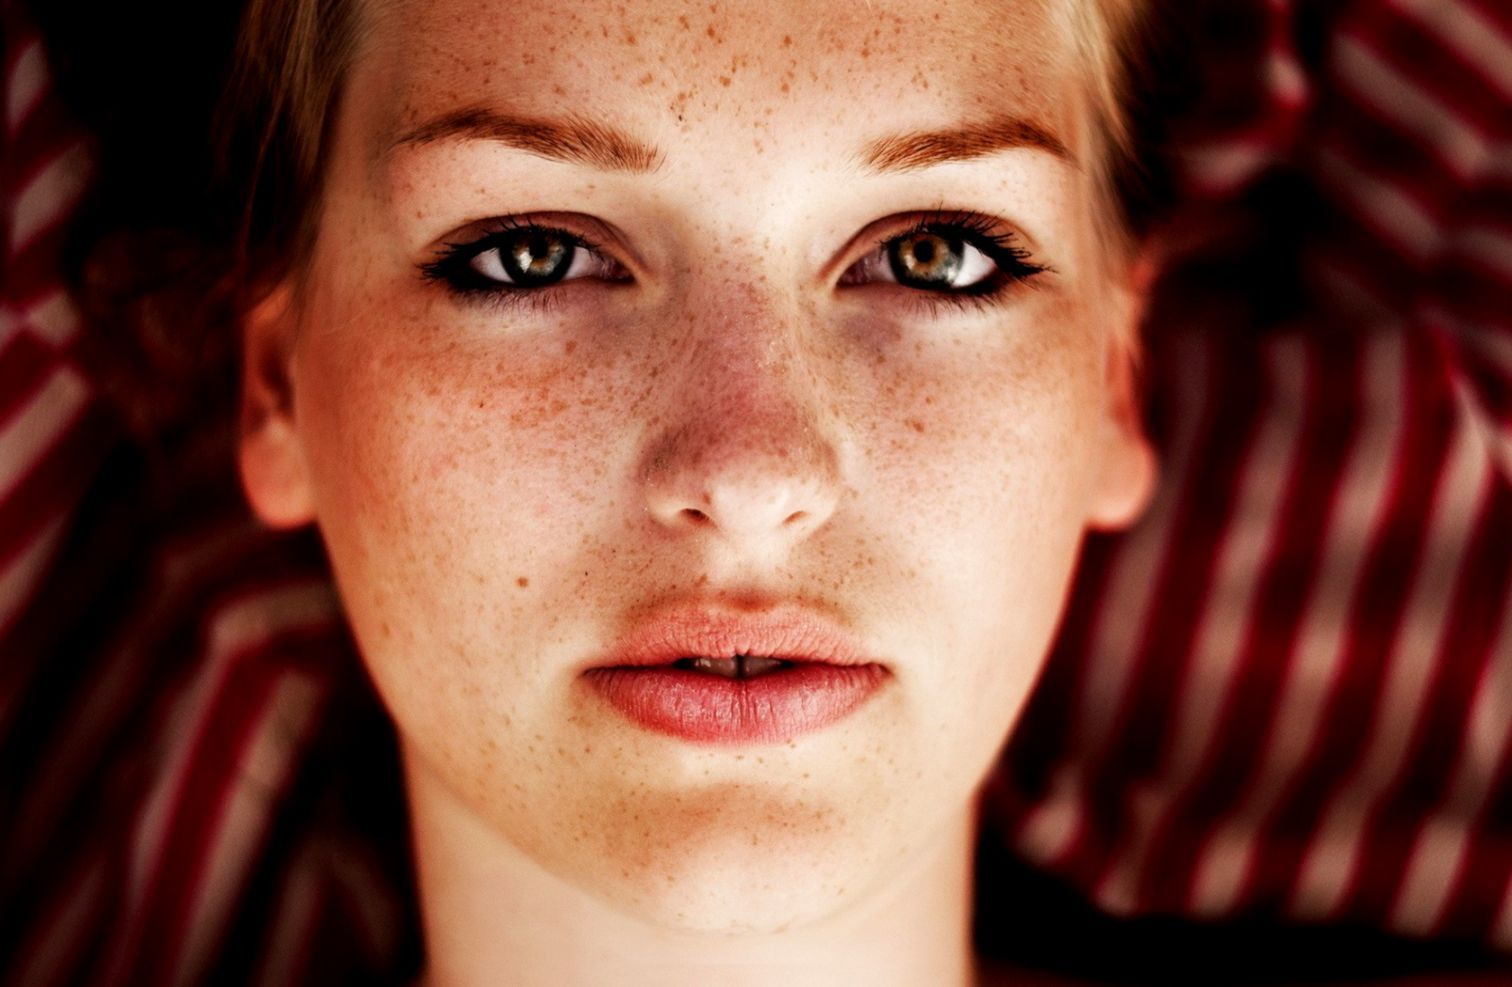 Girl Freckles Hd Wallpapers.